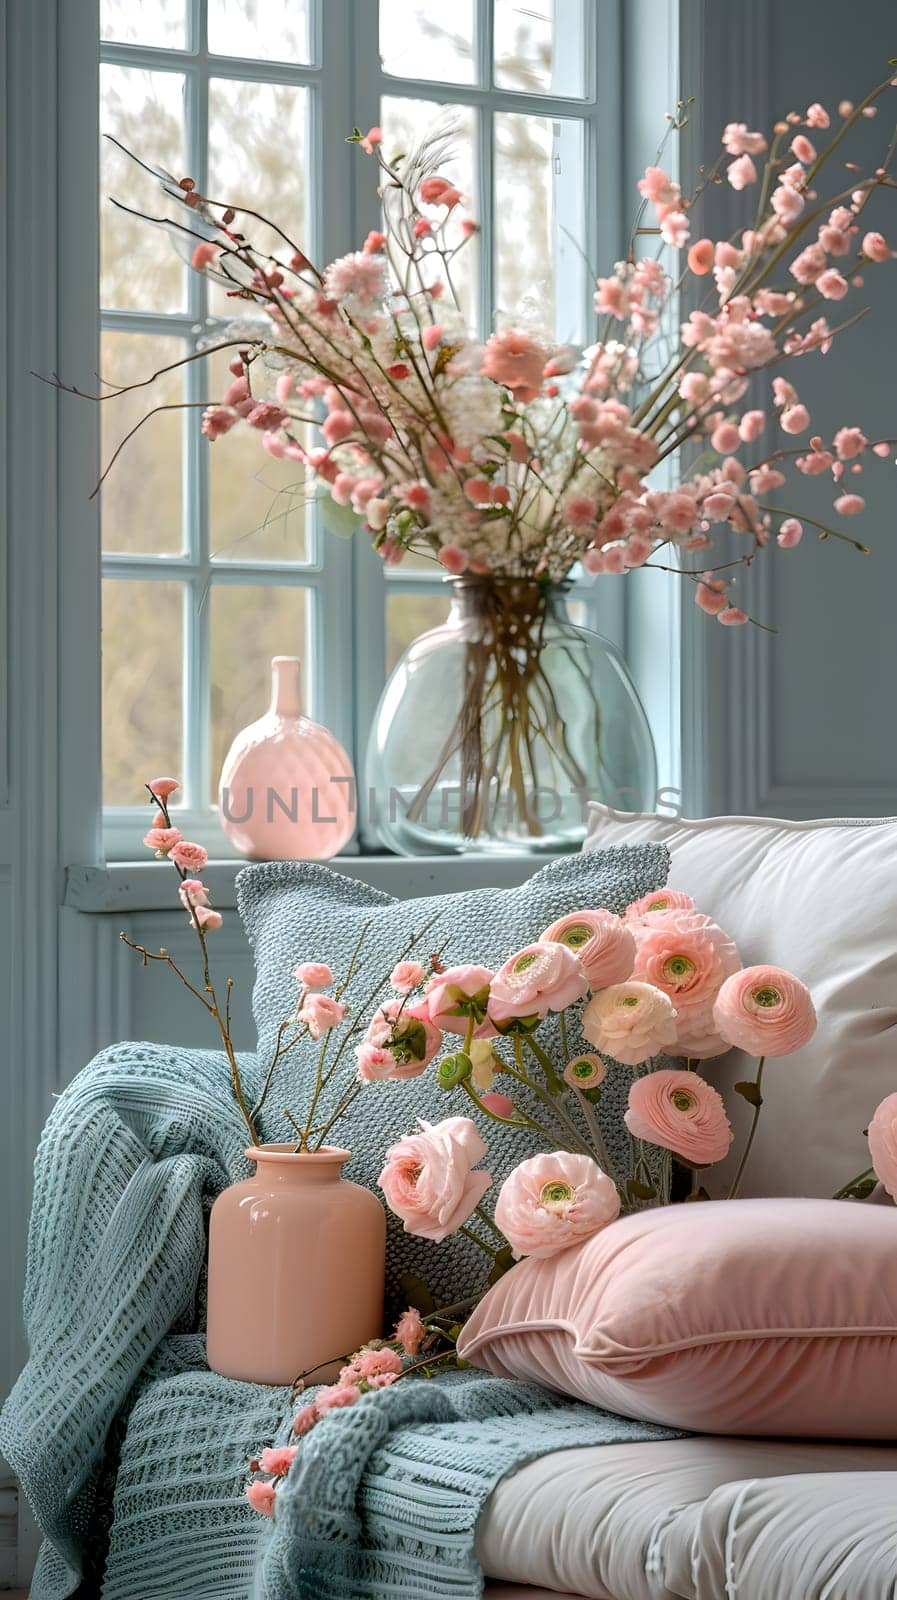 An interior design featuring a living room with a pink couch, pillows, a vase of flowers, and a view of the building through a window. Porcelain art pieces and twigs complete the cozy atmosphere